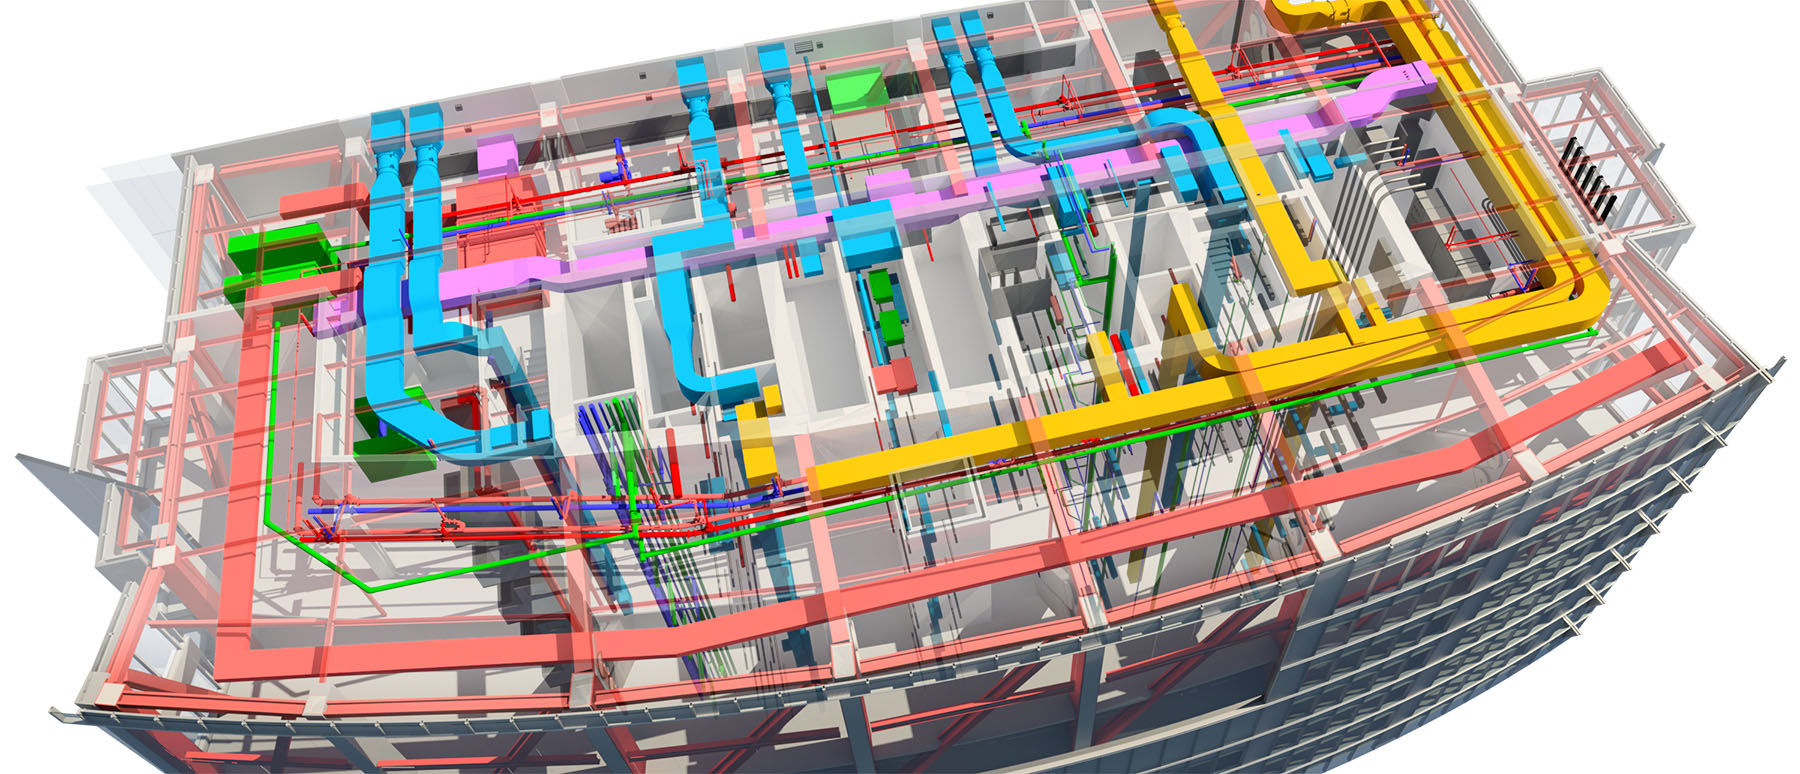 The recent implementation of the BIM mandate means that we’re seeing a transformation in the design and construction process